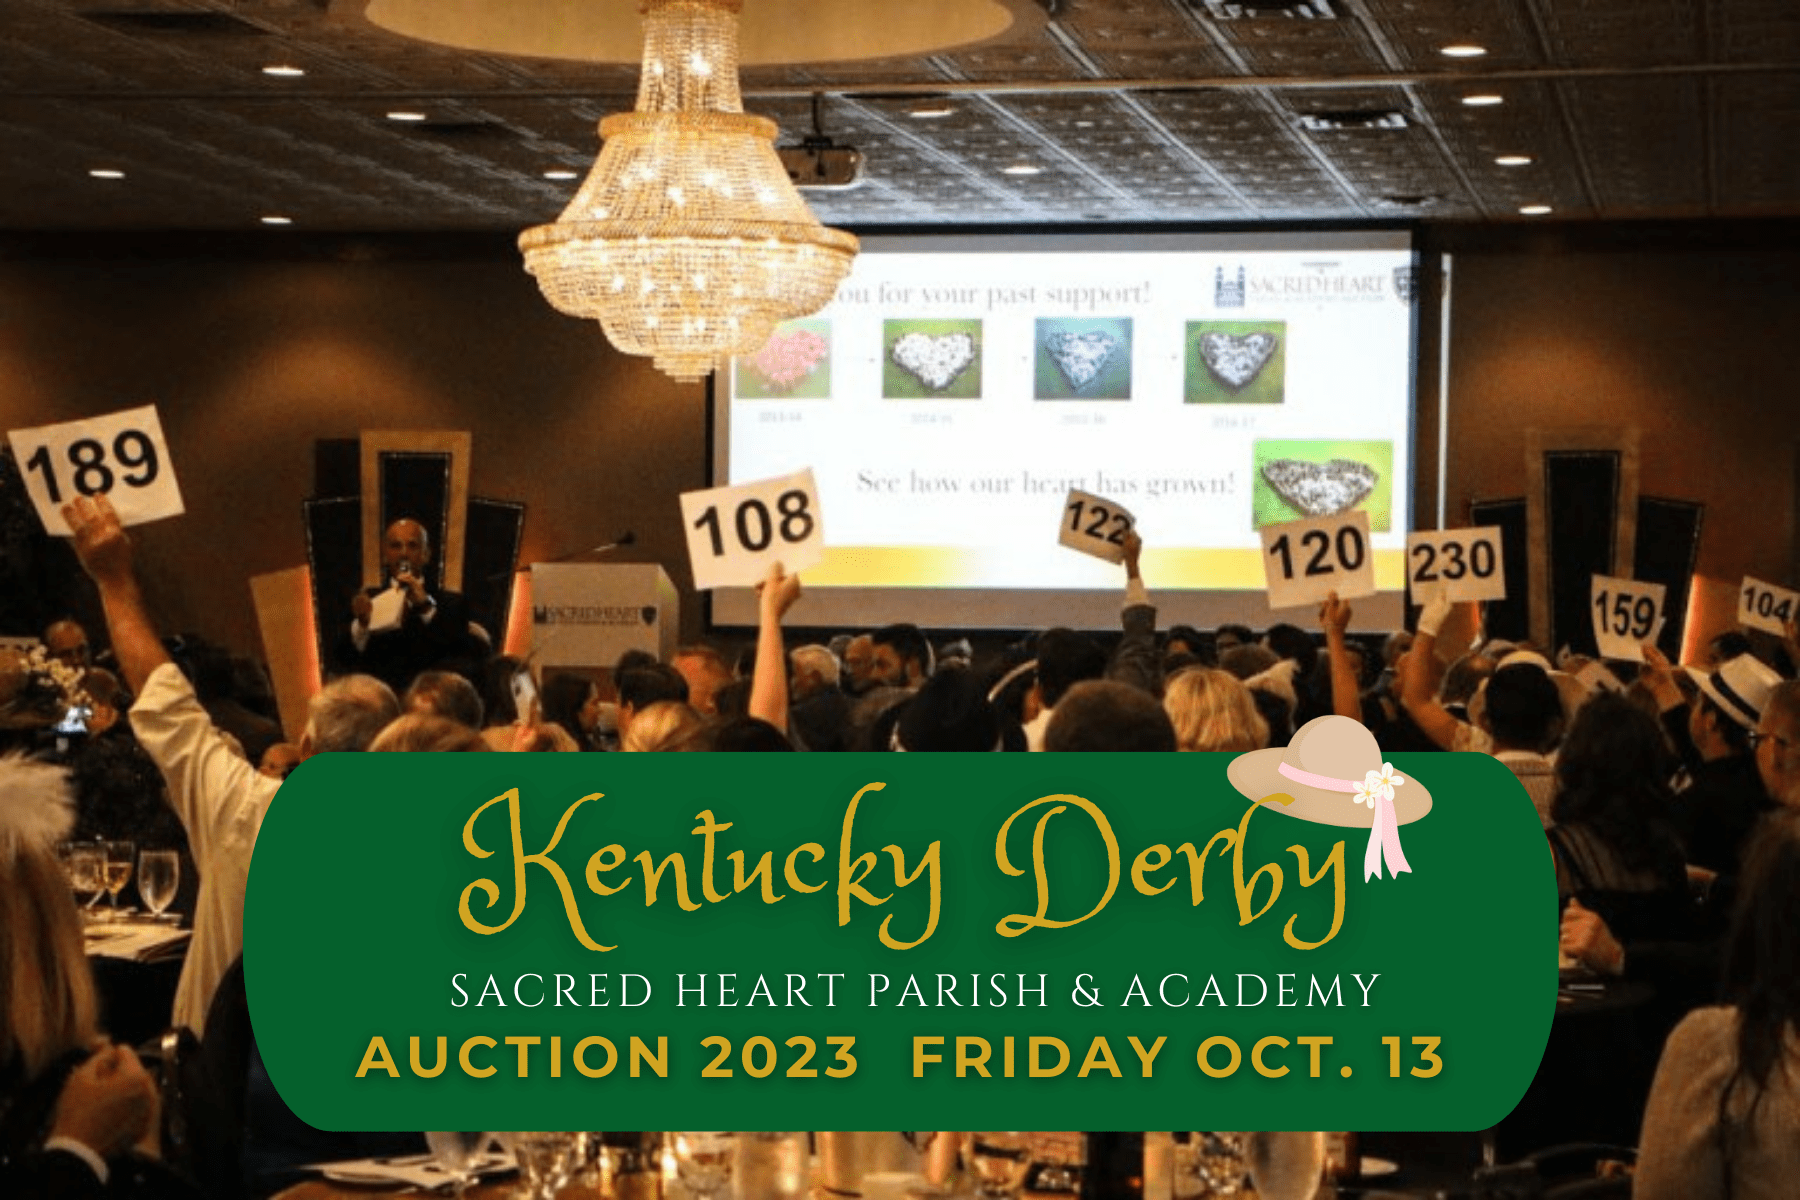 AUCTION 2023—Save the Date! October 13 “Kentucky Derby—A Night at the Races”